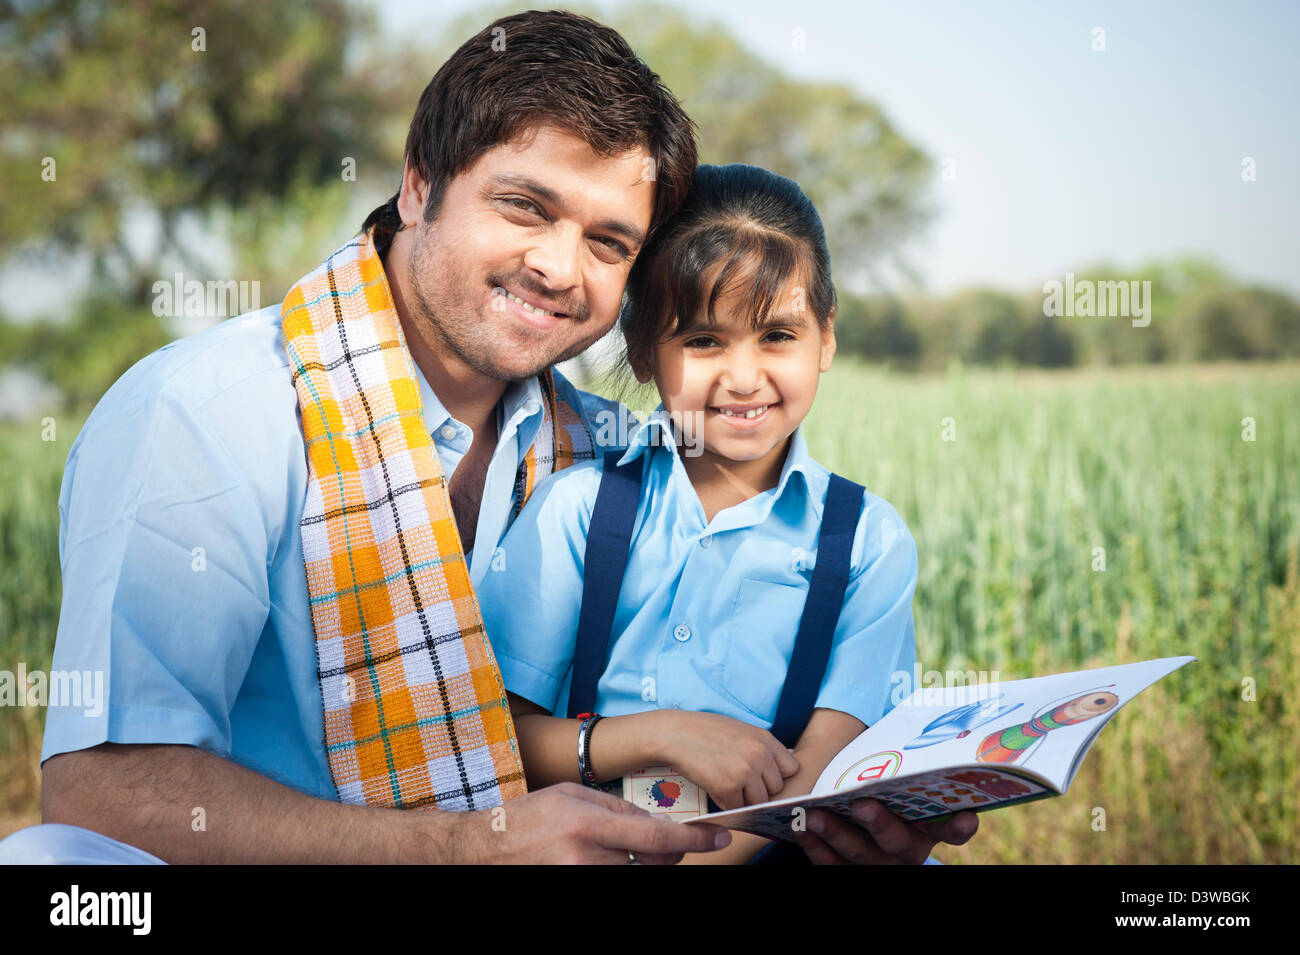 Indians daughter. Indian father. Папа Индия семья. Farmers father. Farmer with daughter.